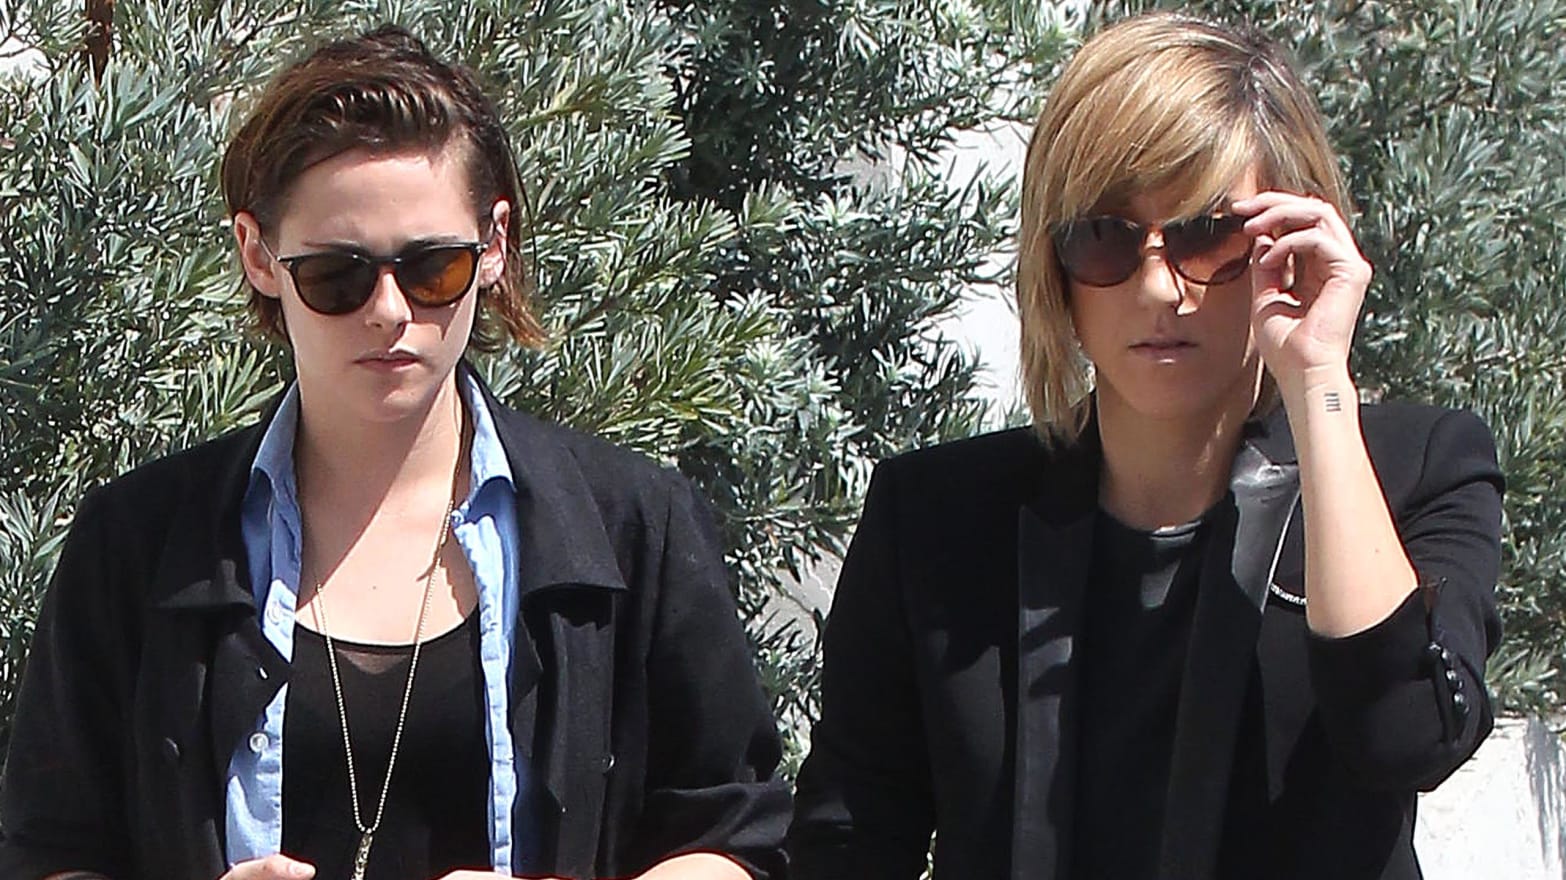 Kristen Stewart Gushes About Her Girlfriend Finally, an Actor Gets Why Coming Out Matters